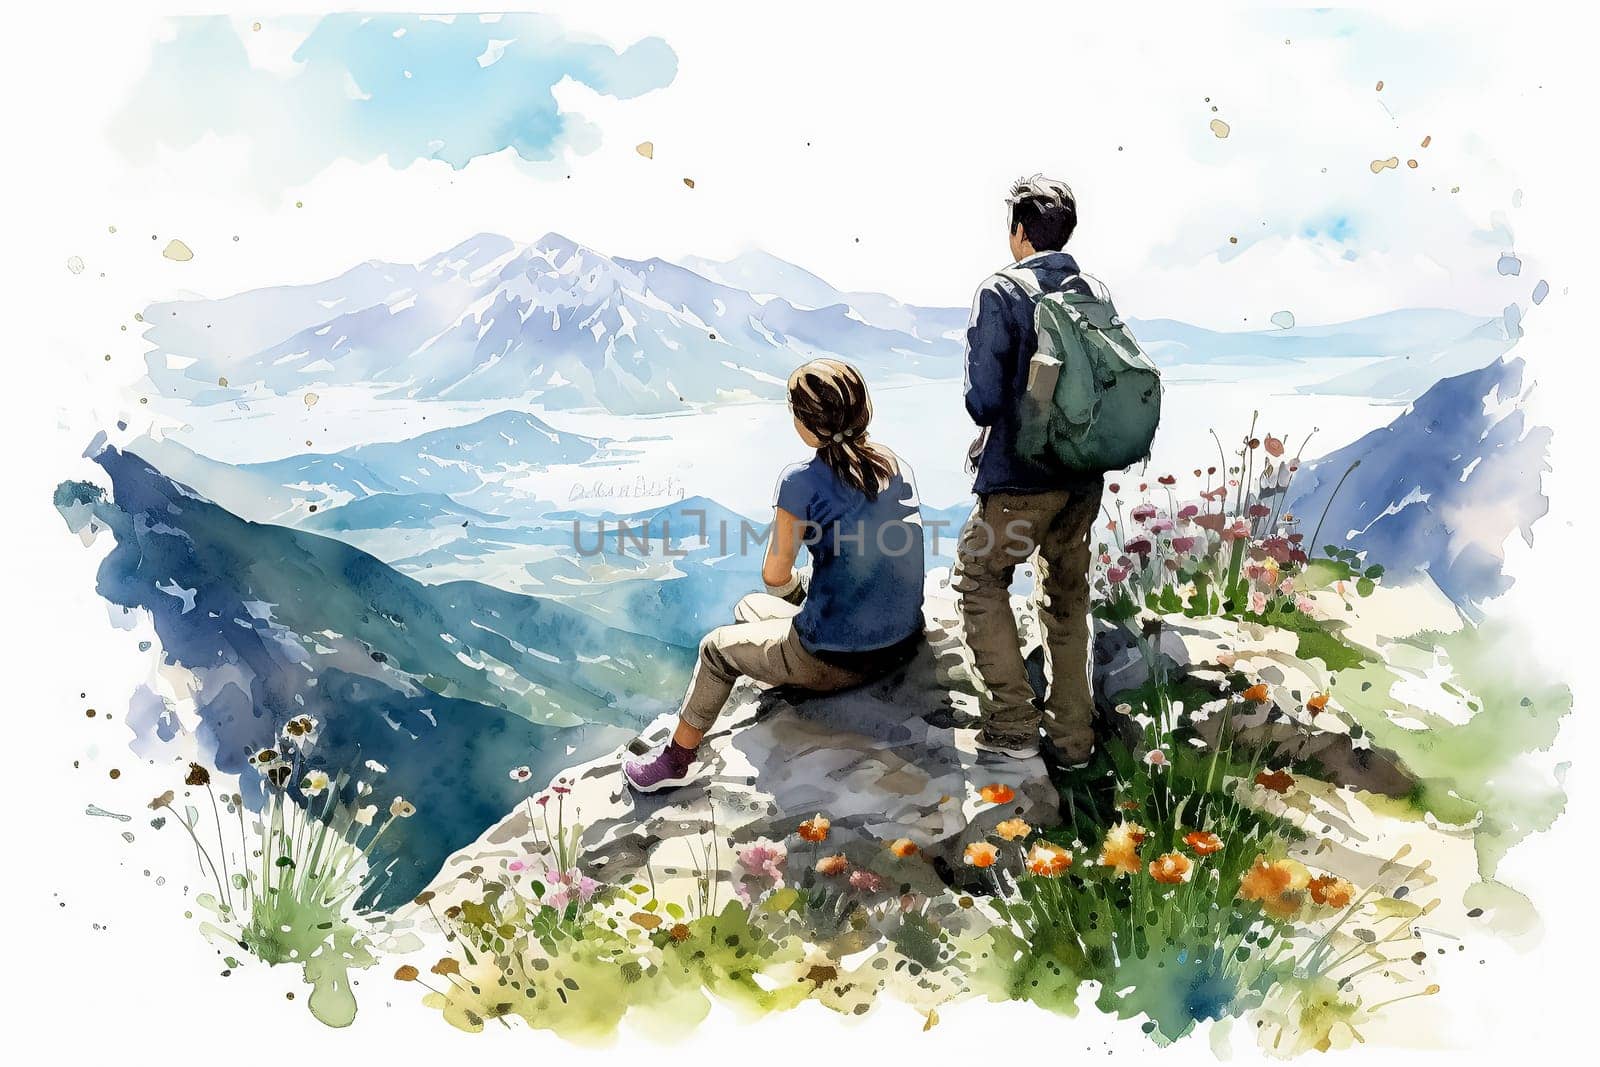 Experience the serenity of love with a watercolor illustration depicting a couple in the mountains. by Alla_Morozova93